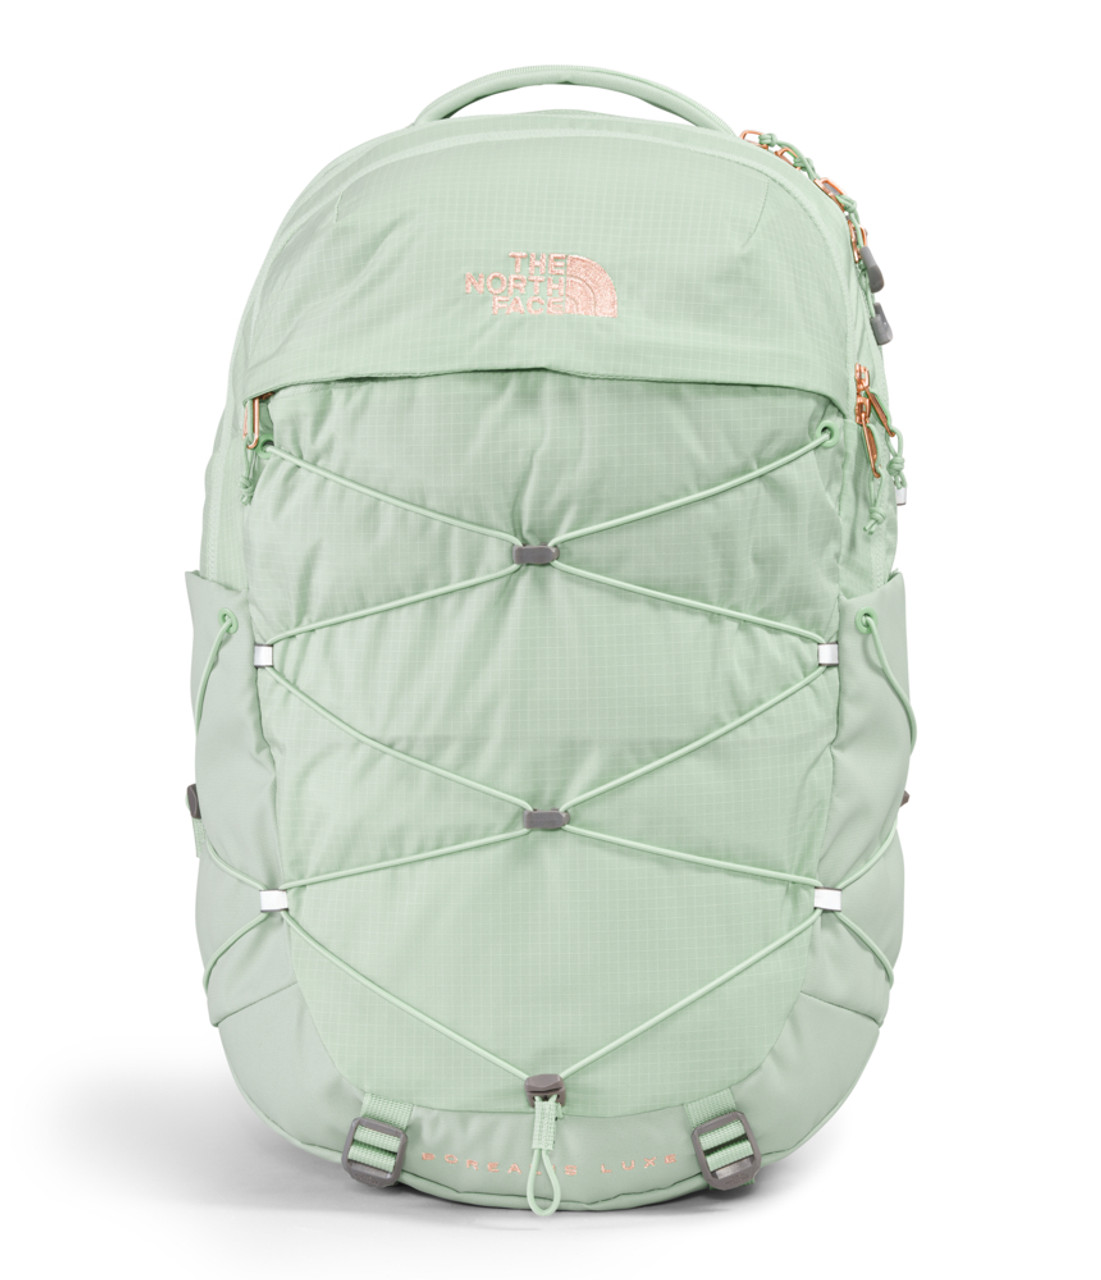 https://cdn11.bigcommerce.com/s-zut1msomd6/images/stencil/1280x1280/products/38041/235637/The-North-Face-Acc-Womens-Backpack-NF0A81E7-Borealis-Luxe-O5W-Misty-Sage-Burnt-Coral-Metallic-Main__63243.1687452155.jpg?c=1